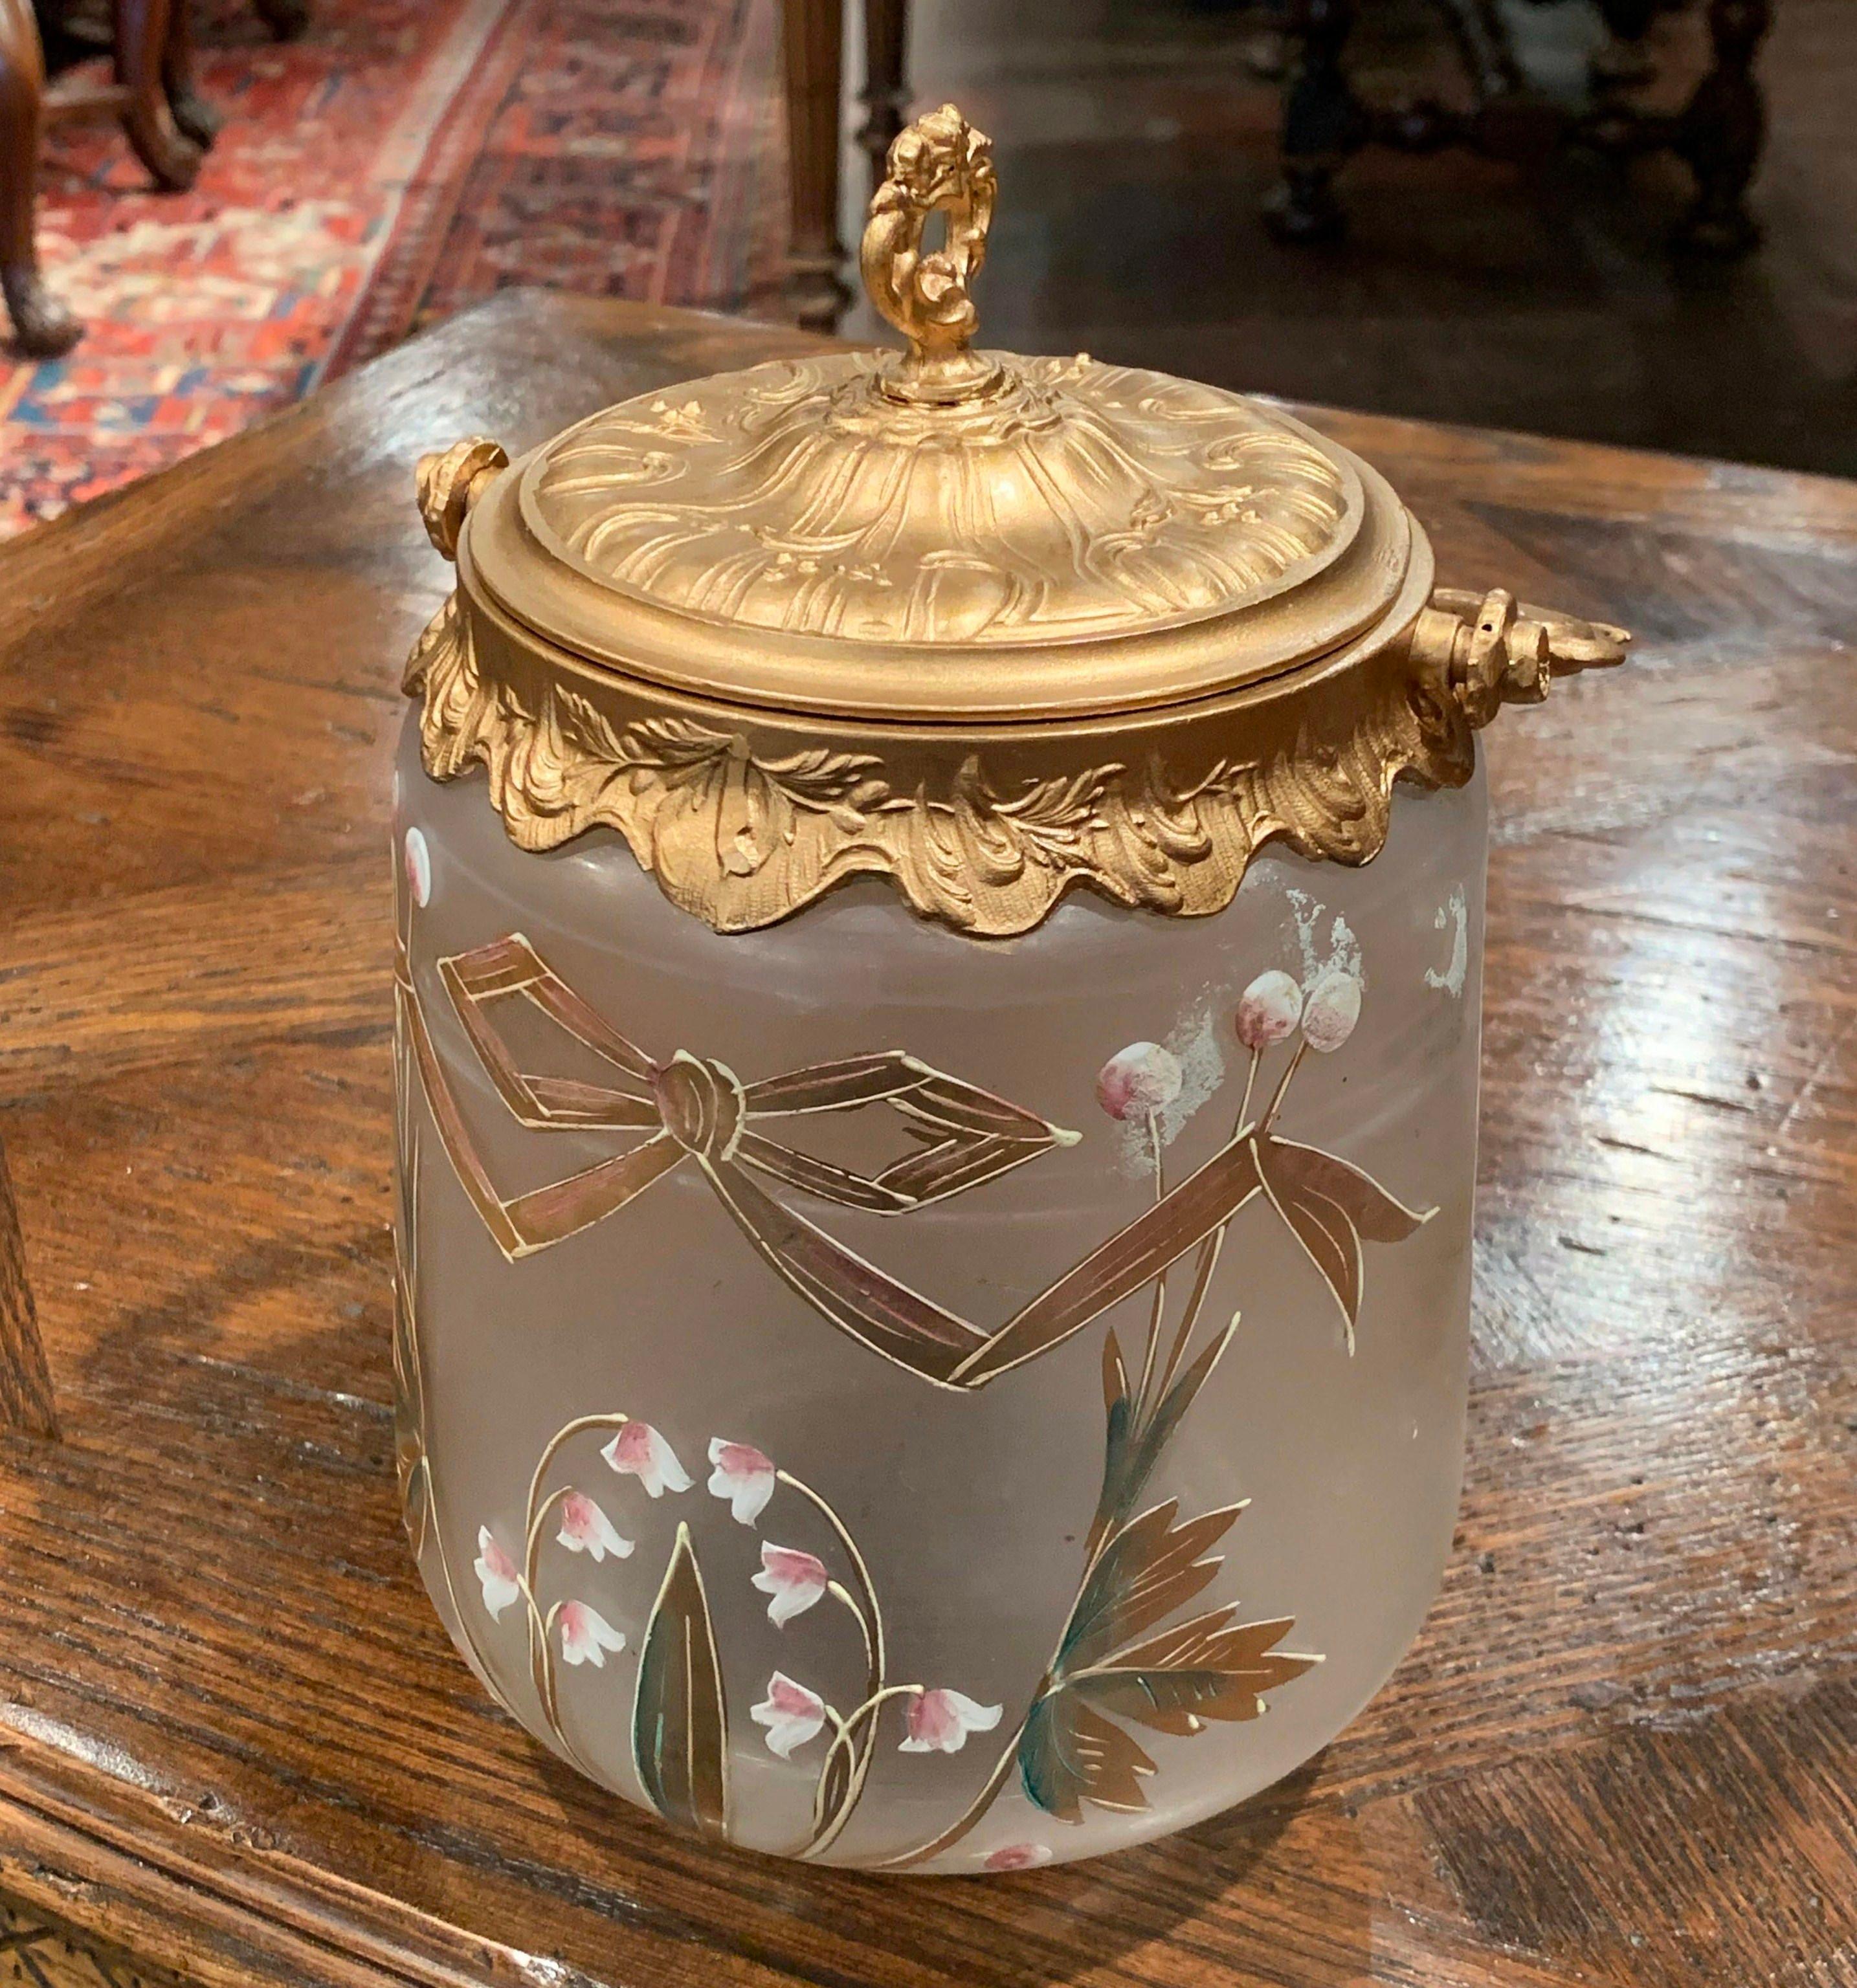 Decorate a kitchen or bathroom counter with this antique bonbonniere. Crafted in France circa 1920, the versatile jar has a metal top that's embellished with an ornate handle. The jar has a frosted glass decorated with traditional, hand painted